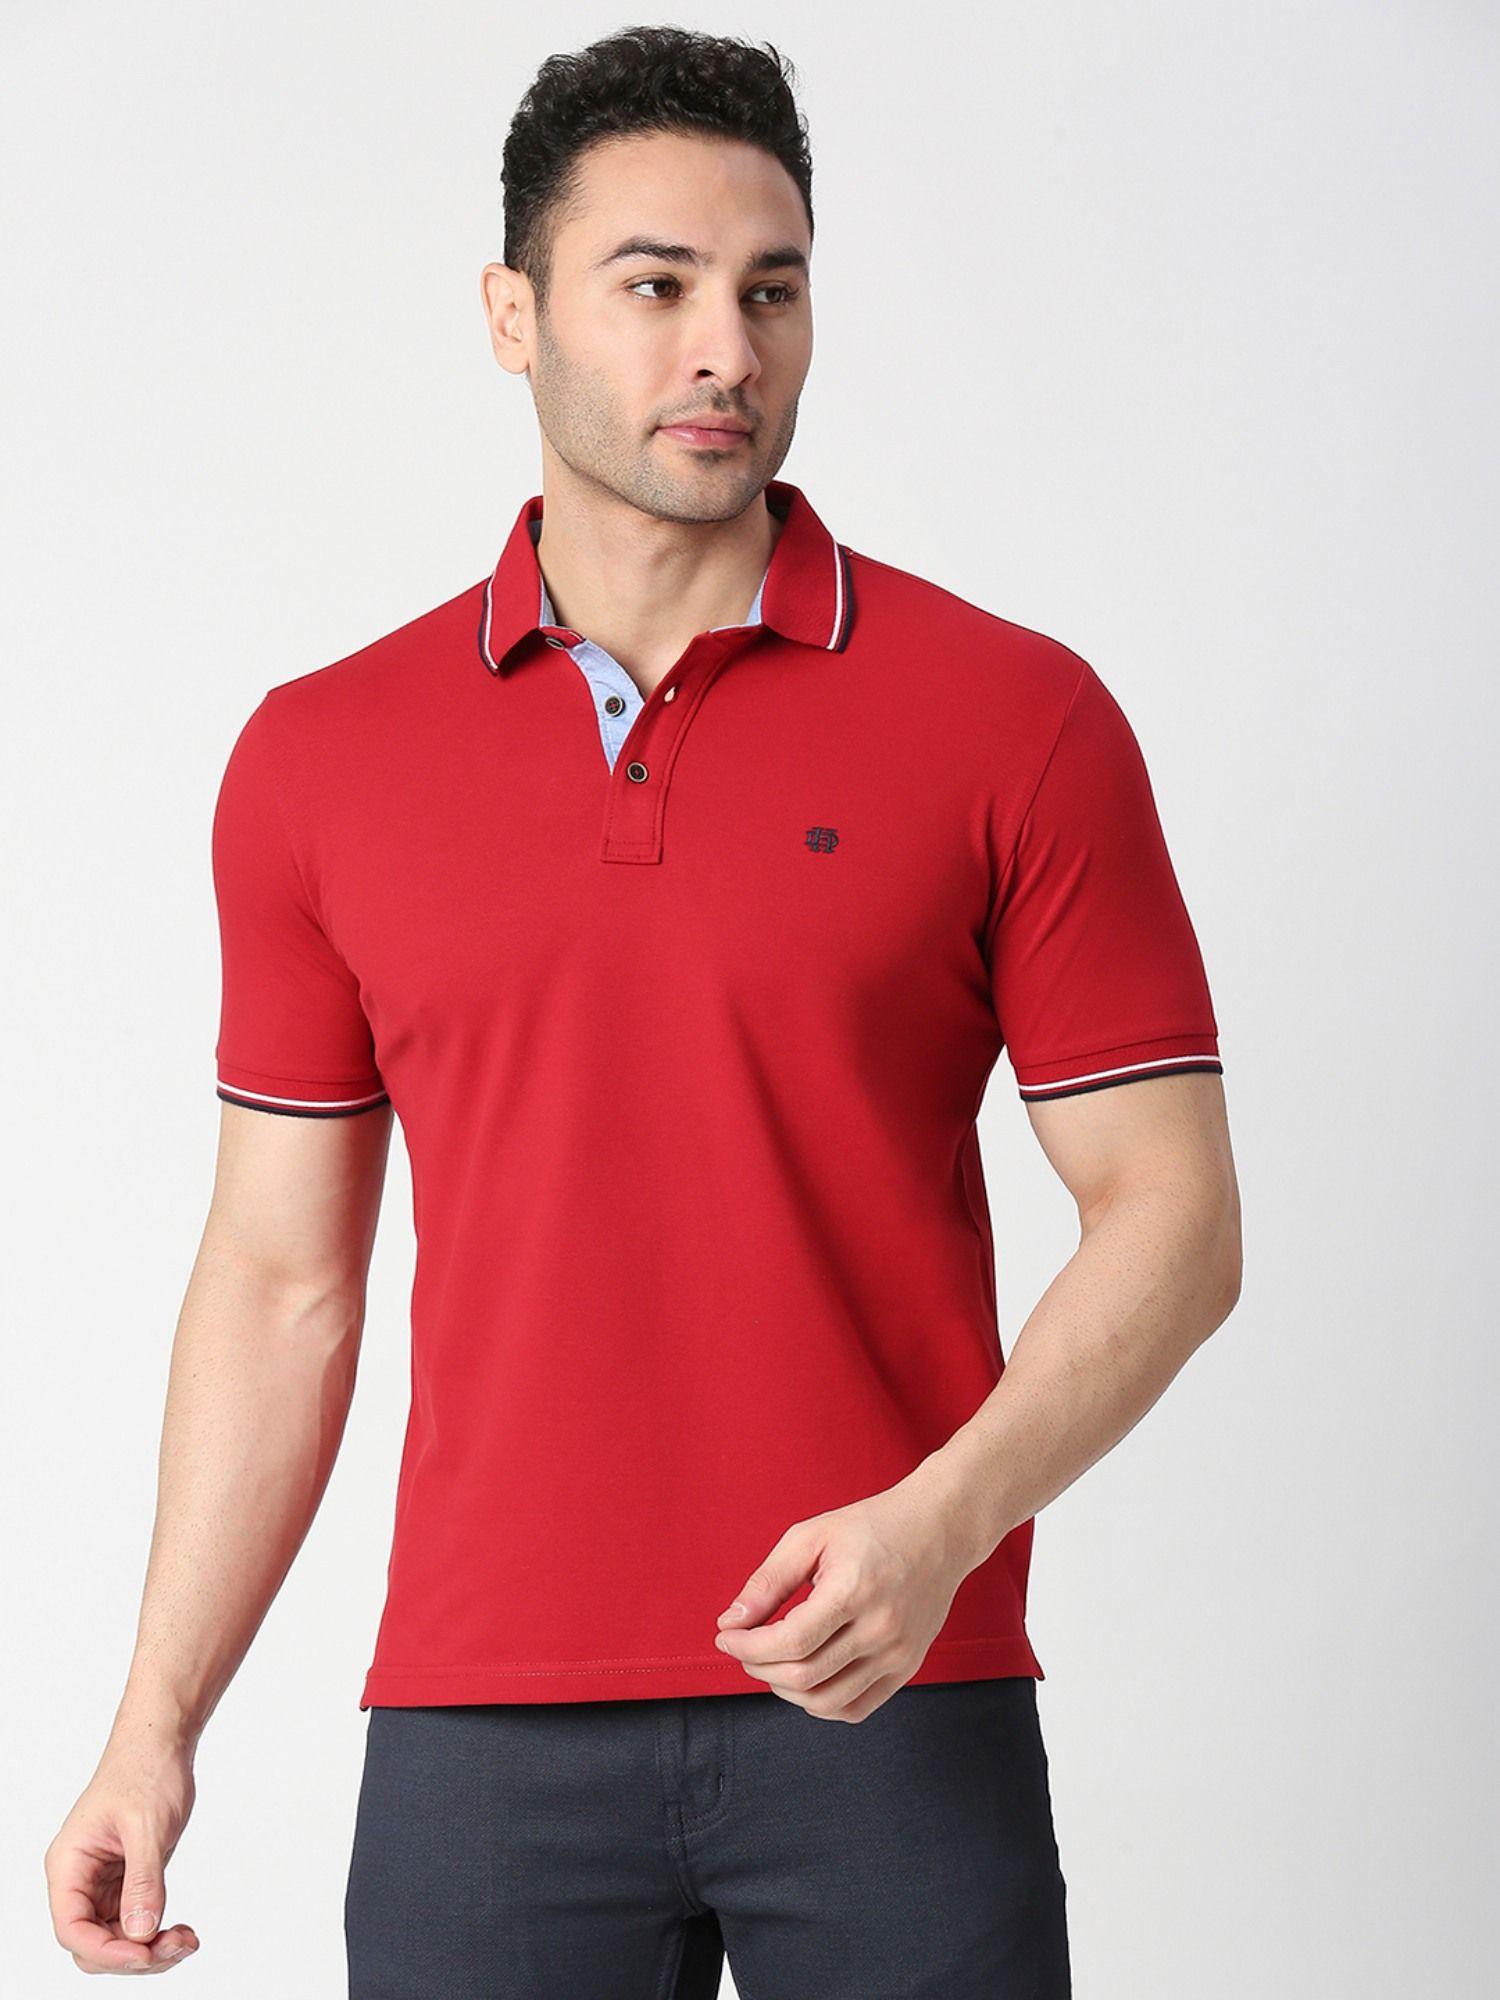 half sleeves red pique lycra polo t-shirt with tipping collar